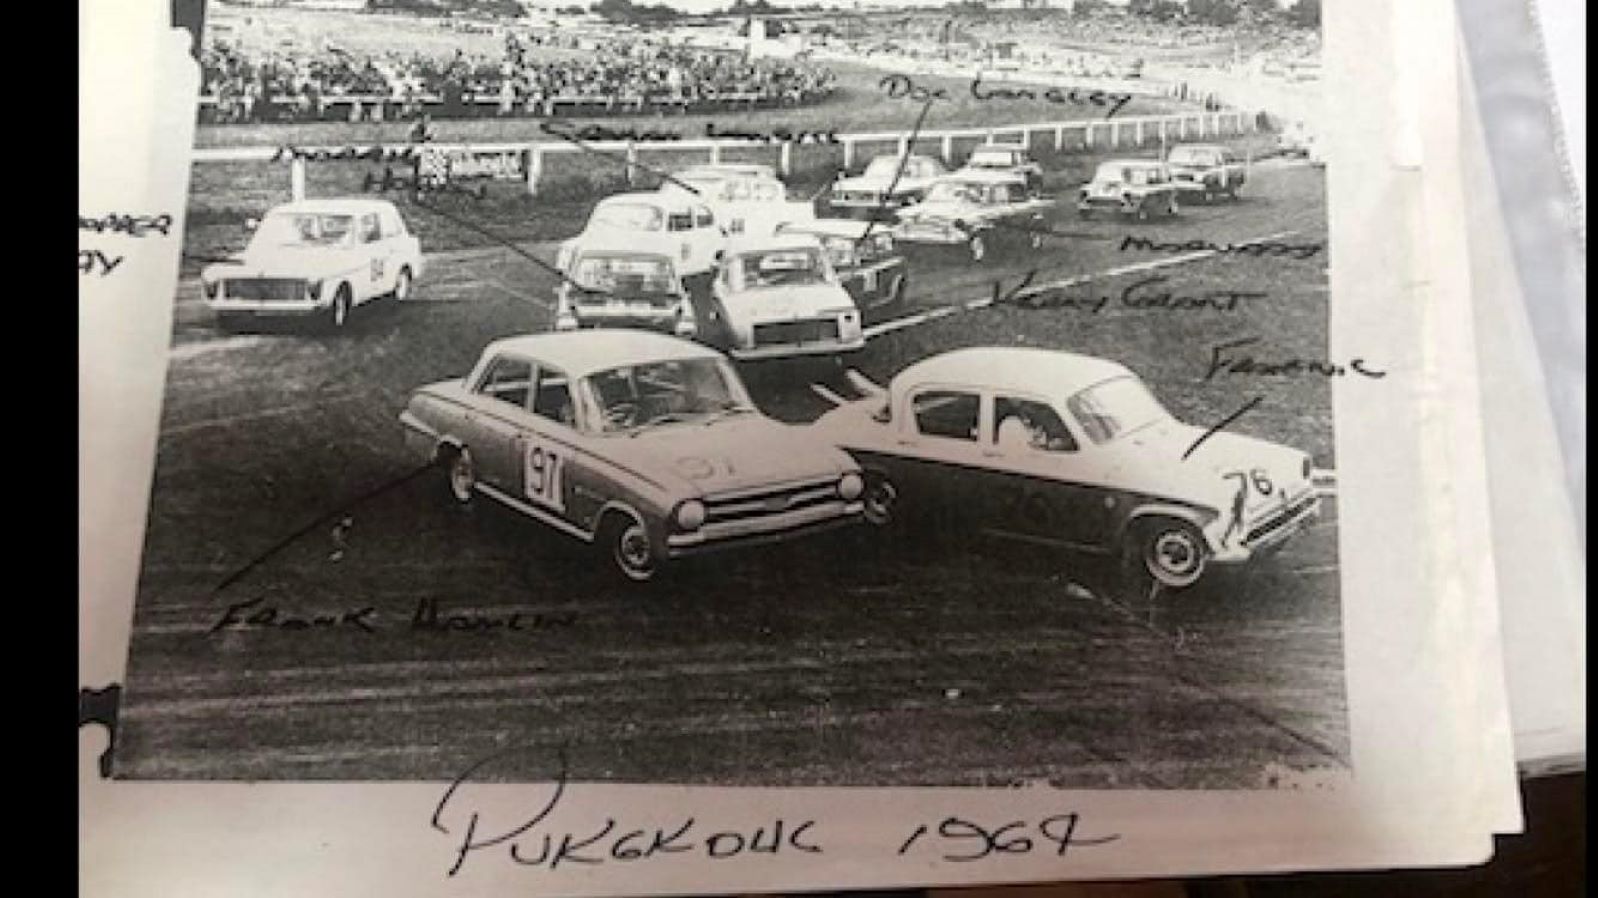 Name:  Pukekohe 1964 #022 1964 Saloon Car field at the Elbow - GP meeting Q 172 kb arch HVRA Bruce Dyer.jpg
Views: 382
Size:  172.4 KB